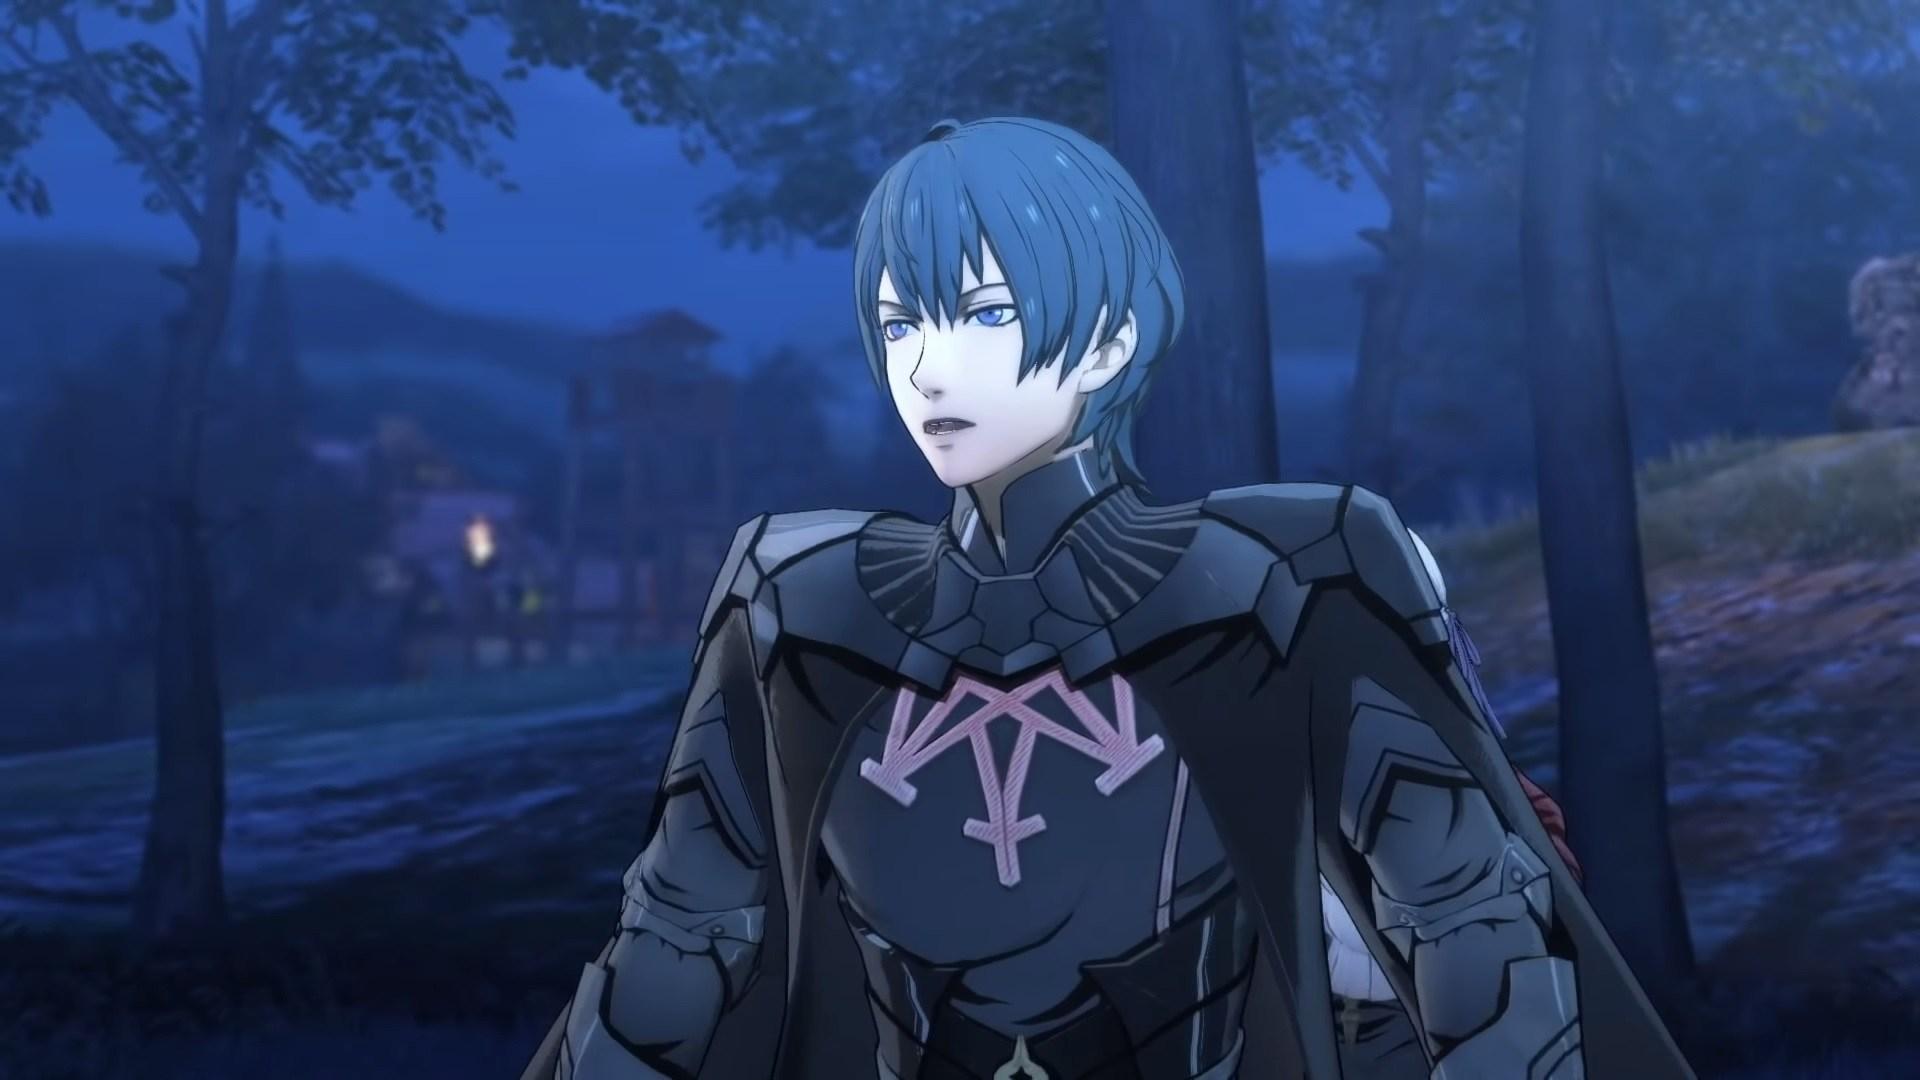 Byleth in Fire Emblem: Three Houses is a Mess. The Punished